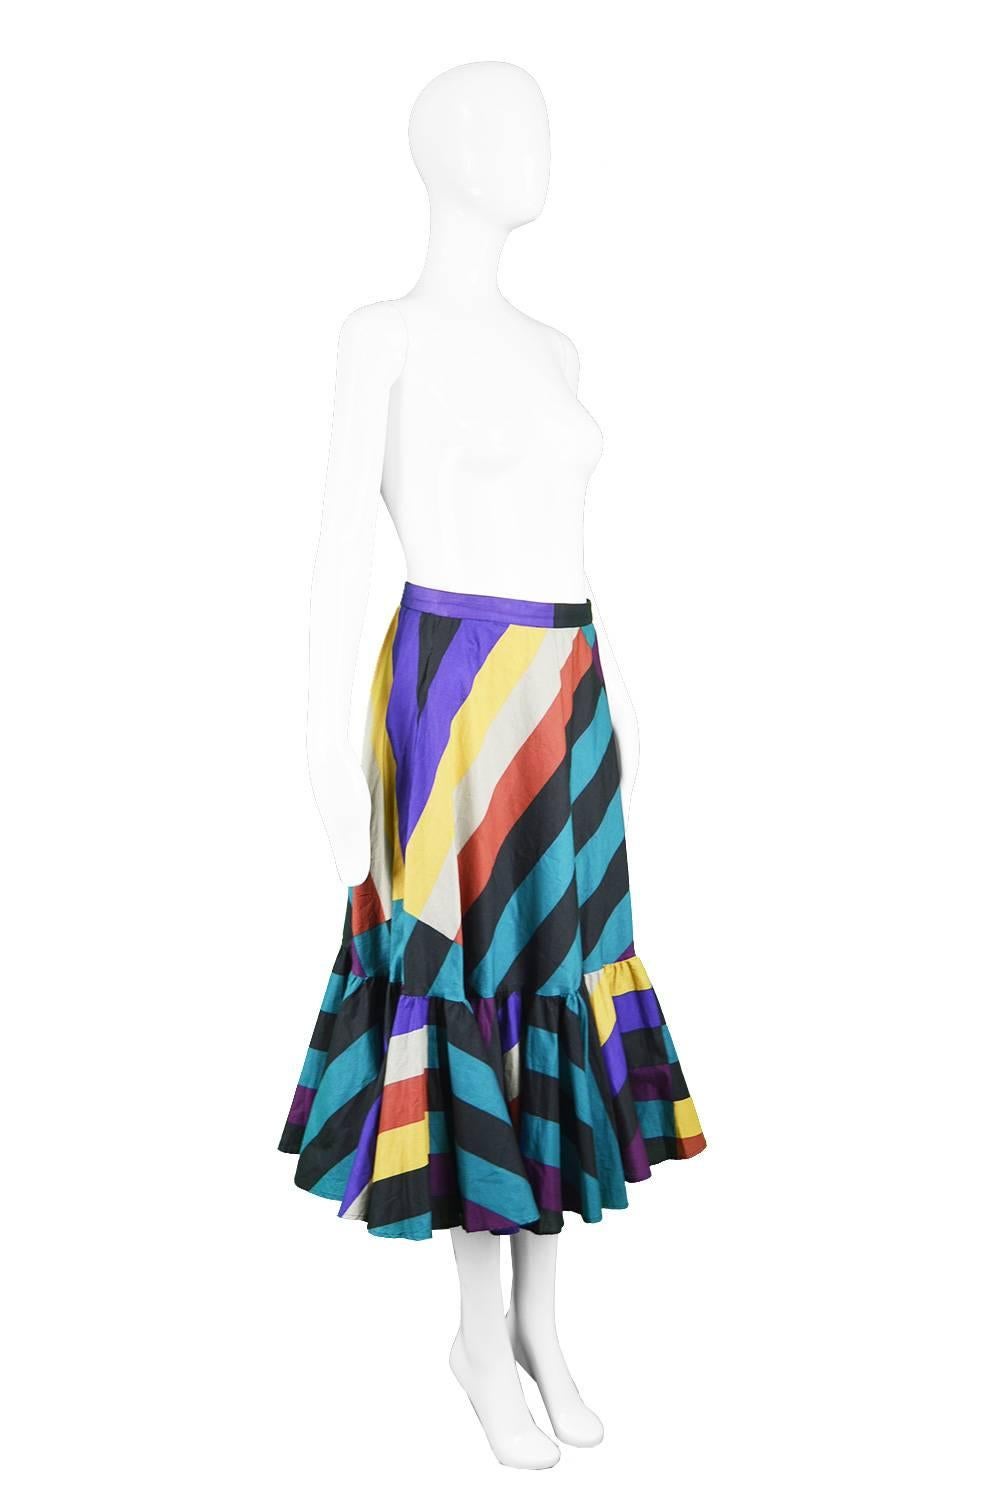 Women's or Men's Gucci Vintage Colorful Striped Cotton Skirt with Full Flounce Hem, 1970s